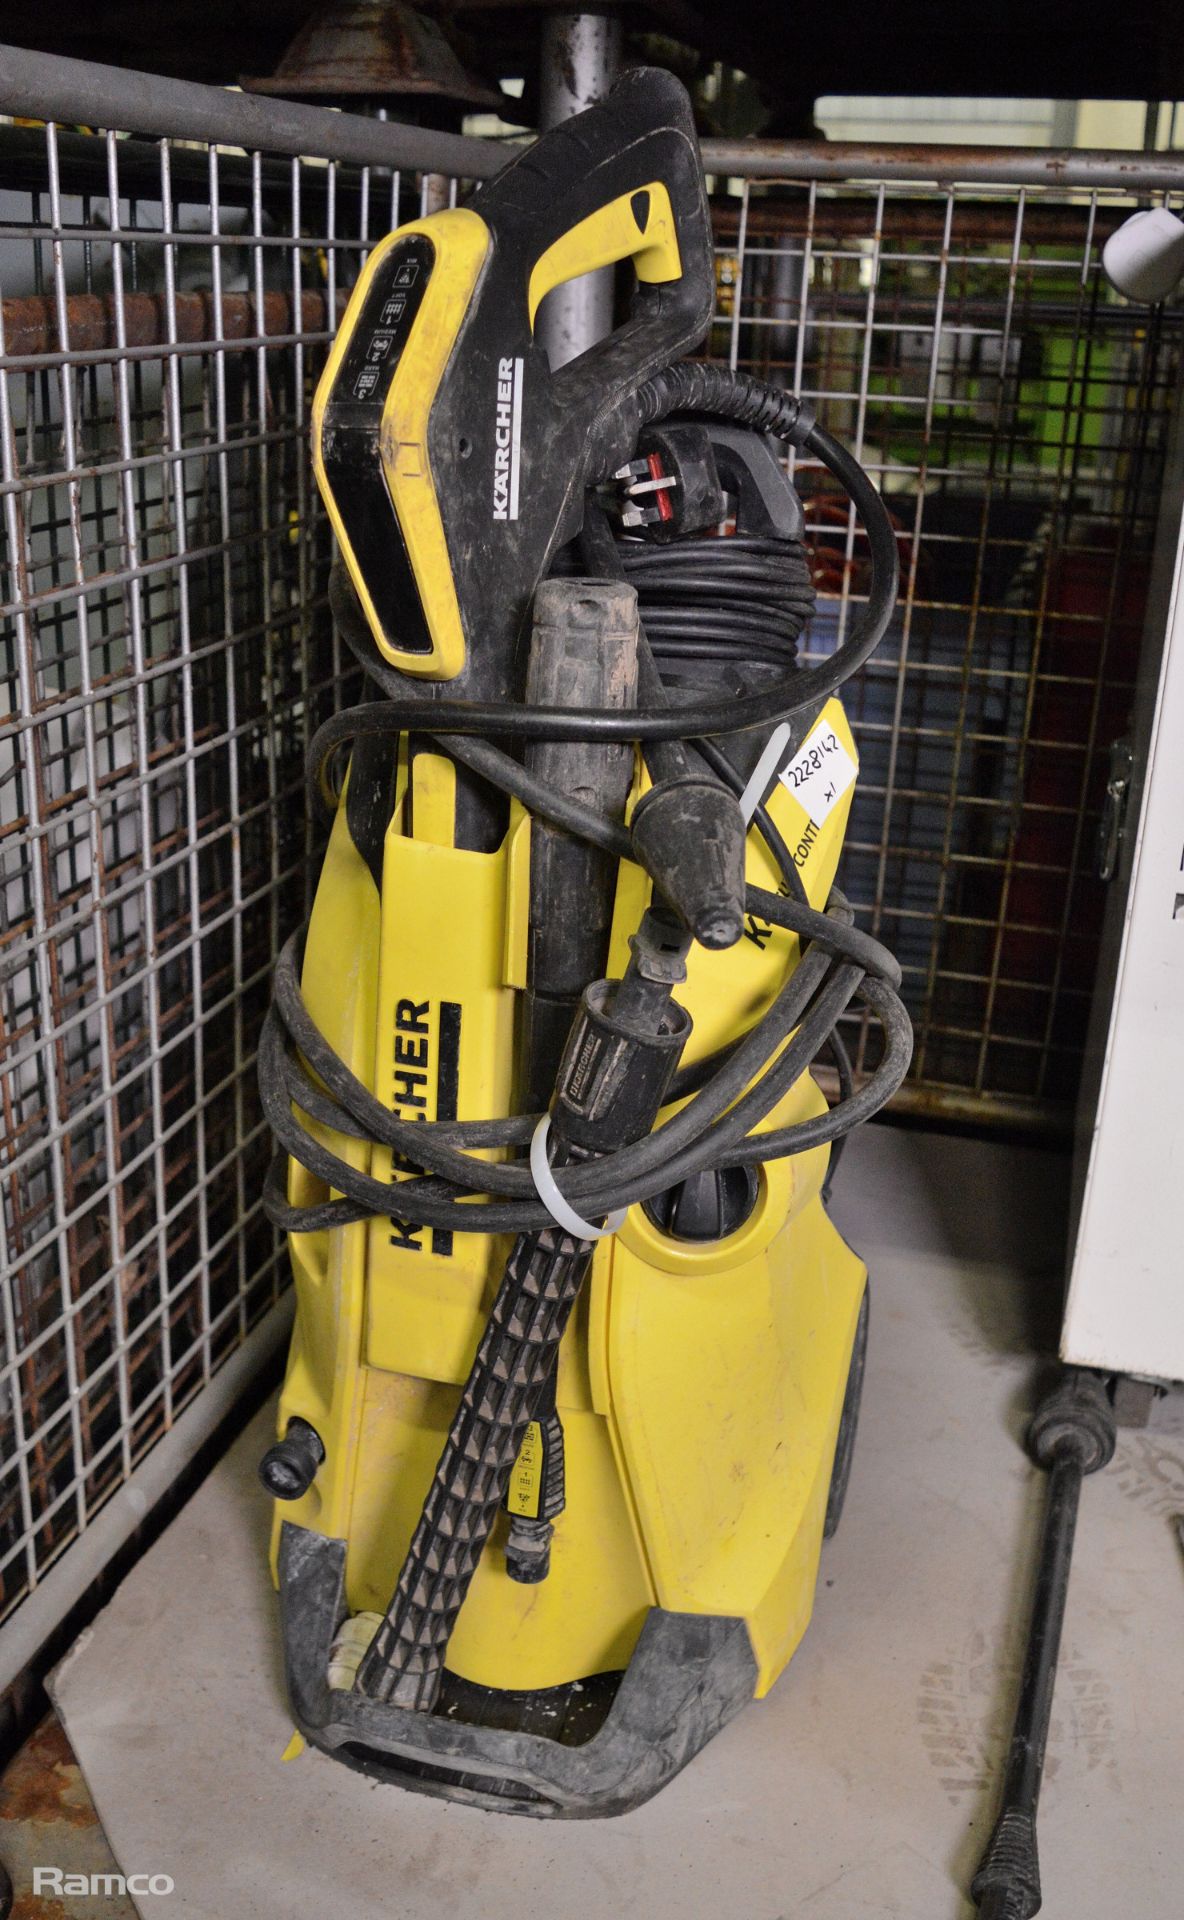 Karcher Patio Cleaning Head Attachment, 2x Karcher K4 Full Control Pressure Washers - Image 3 of 12